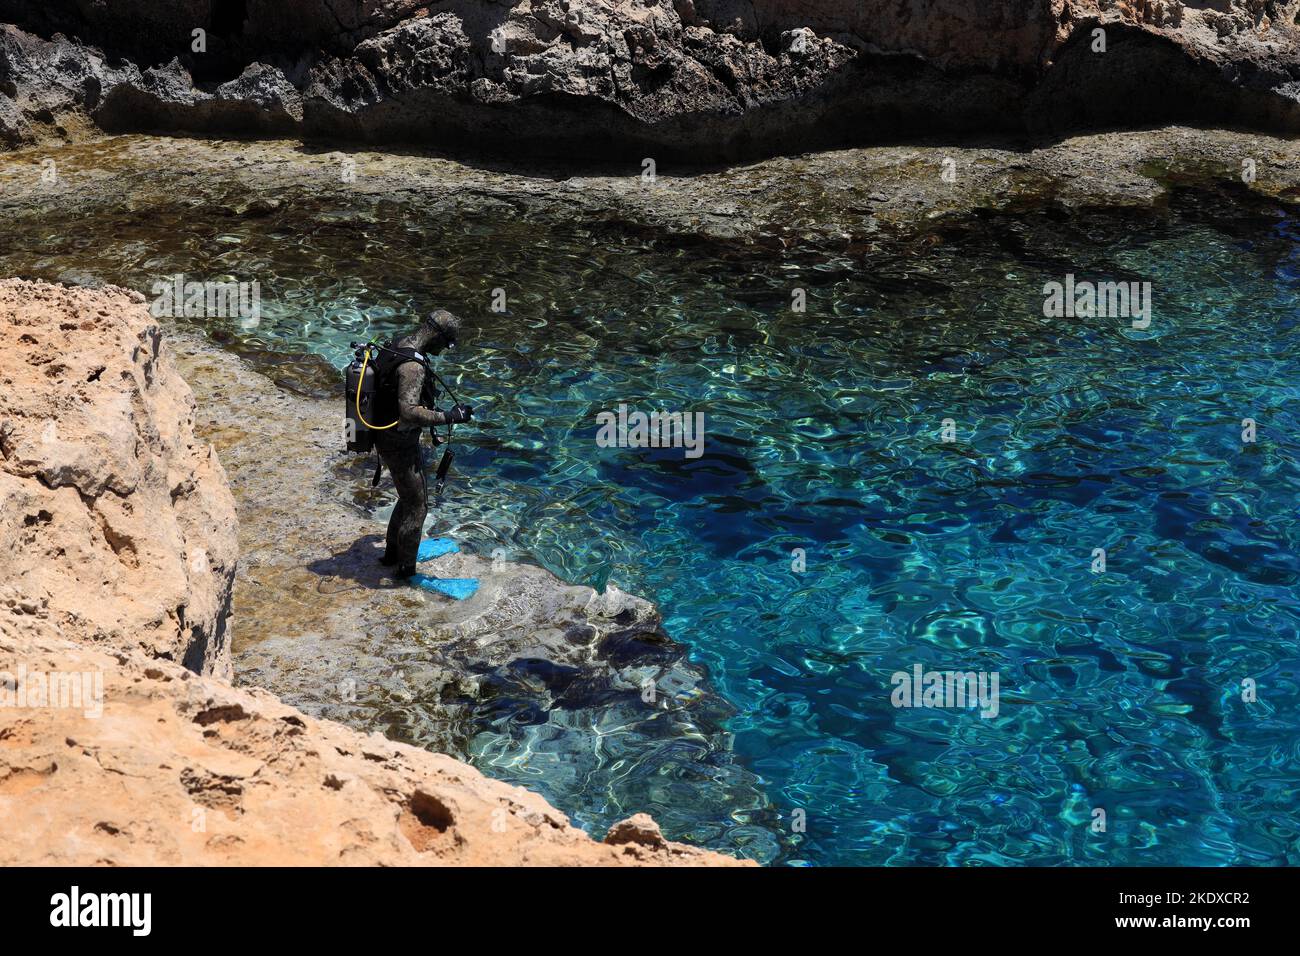 May 29, 2022, Larnaca, Cyprus: A scuba diver prepares to jump into the blue lagoon of the Mediterranean Sea at Cape Greco National Forest Park at the southern end of Famagusta Bay and forms part of Ayia Napa Municipality. The Republic of Cyprus stands at a historic and cultural crossroads between Europe and Asia. Its chief cities-the capital of Nicosia, Limassol, Famagusta, and Paphos have absorbed the influences of generations of conquerors, pilgrims, and travelers and have an air that is both cosmopolitan and provincial. Today Cyprus is a popular tourist destination for visitors from Europe, Stock Photo